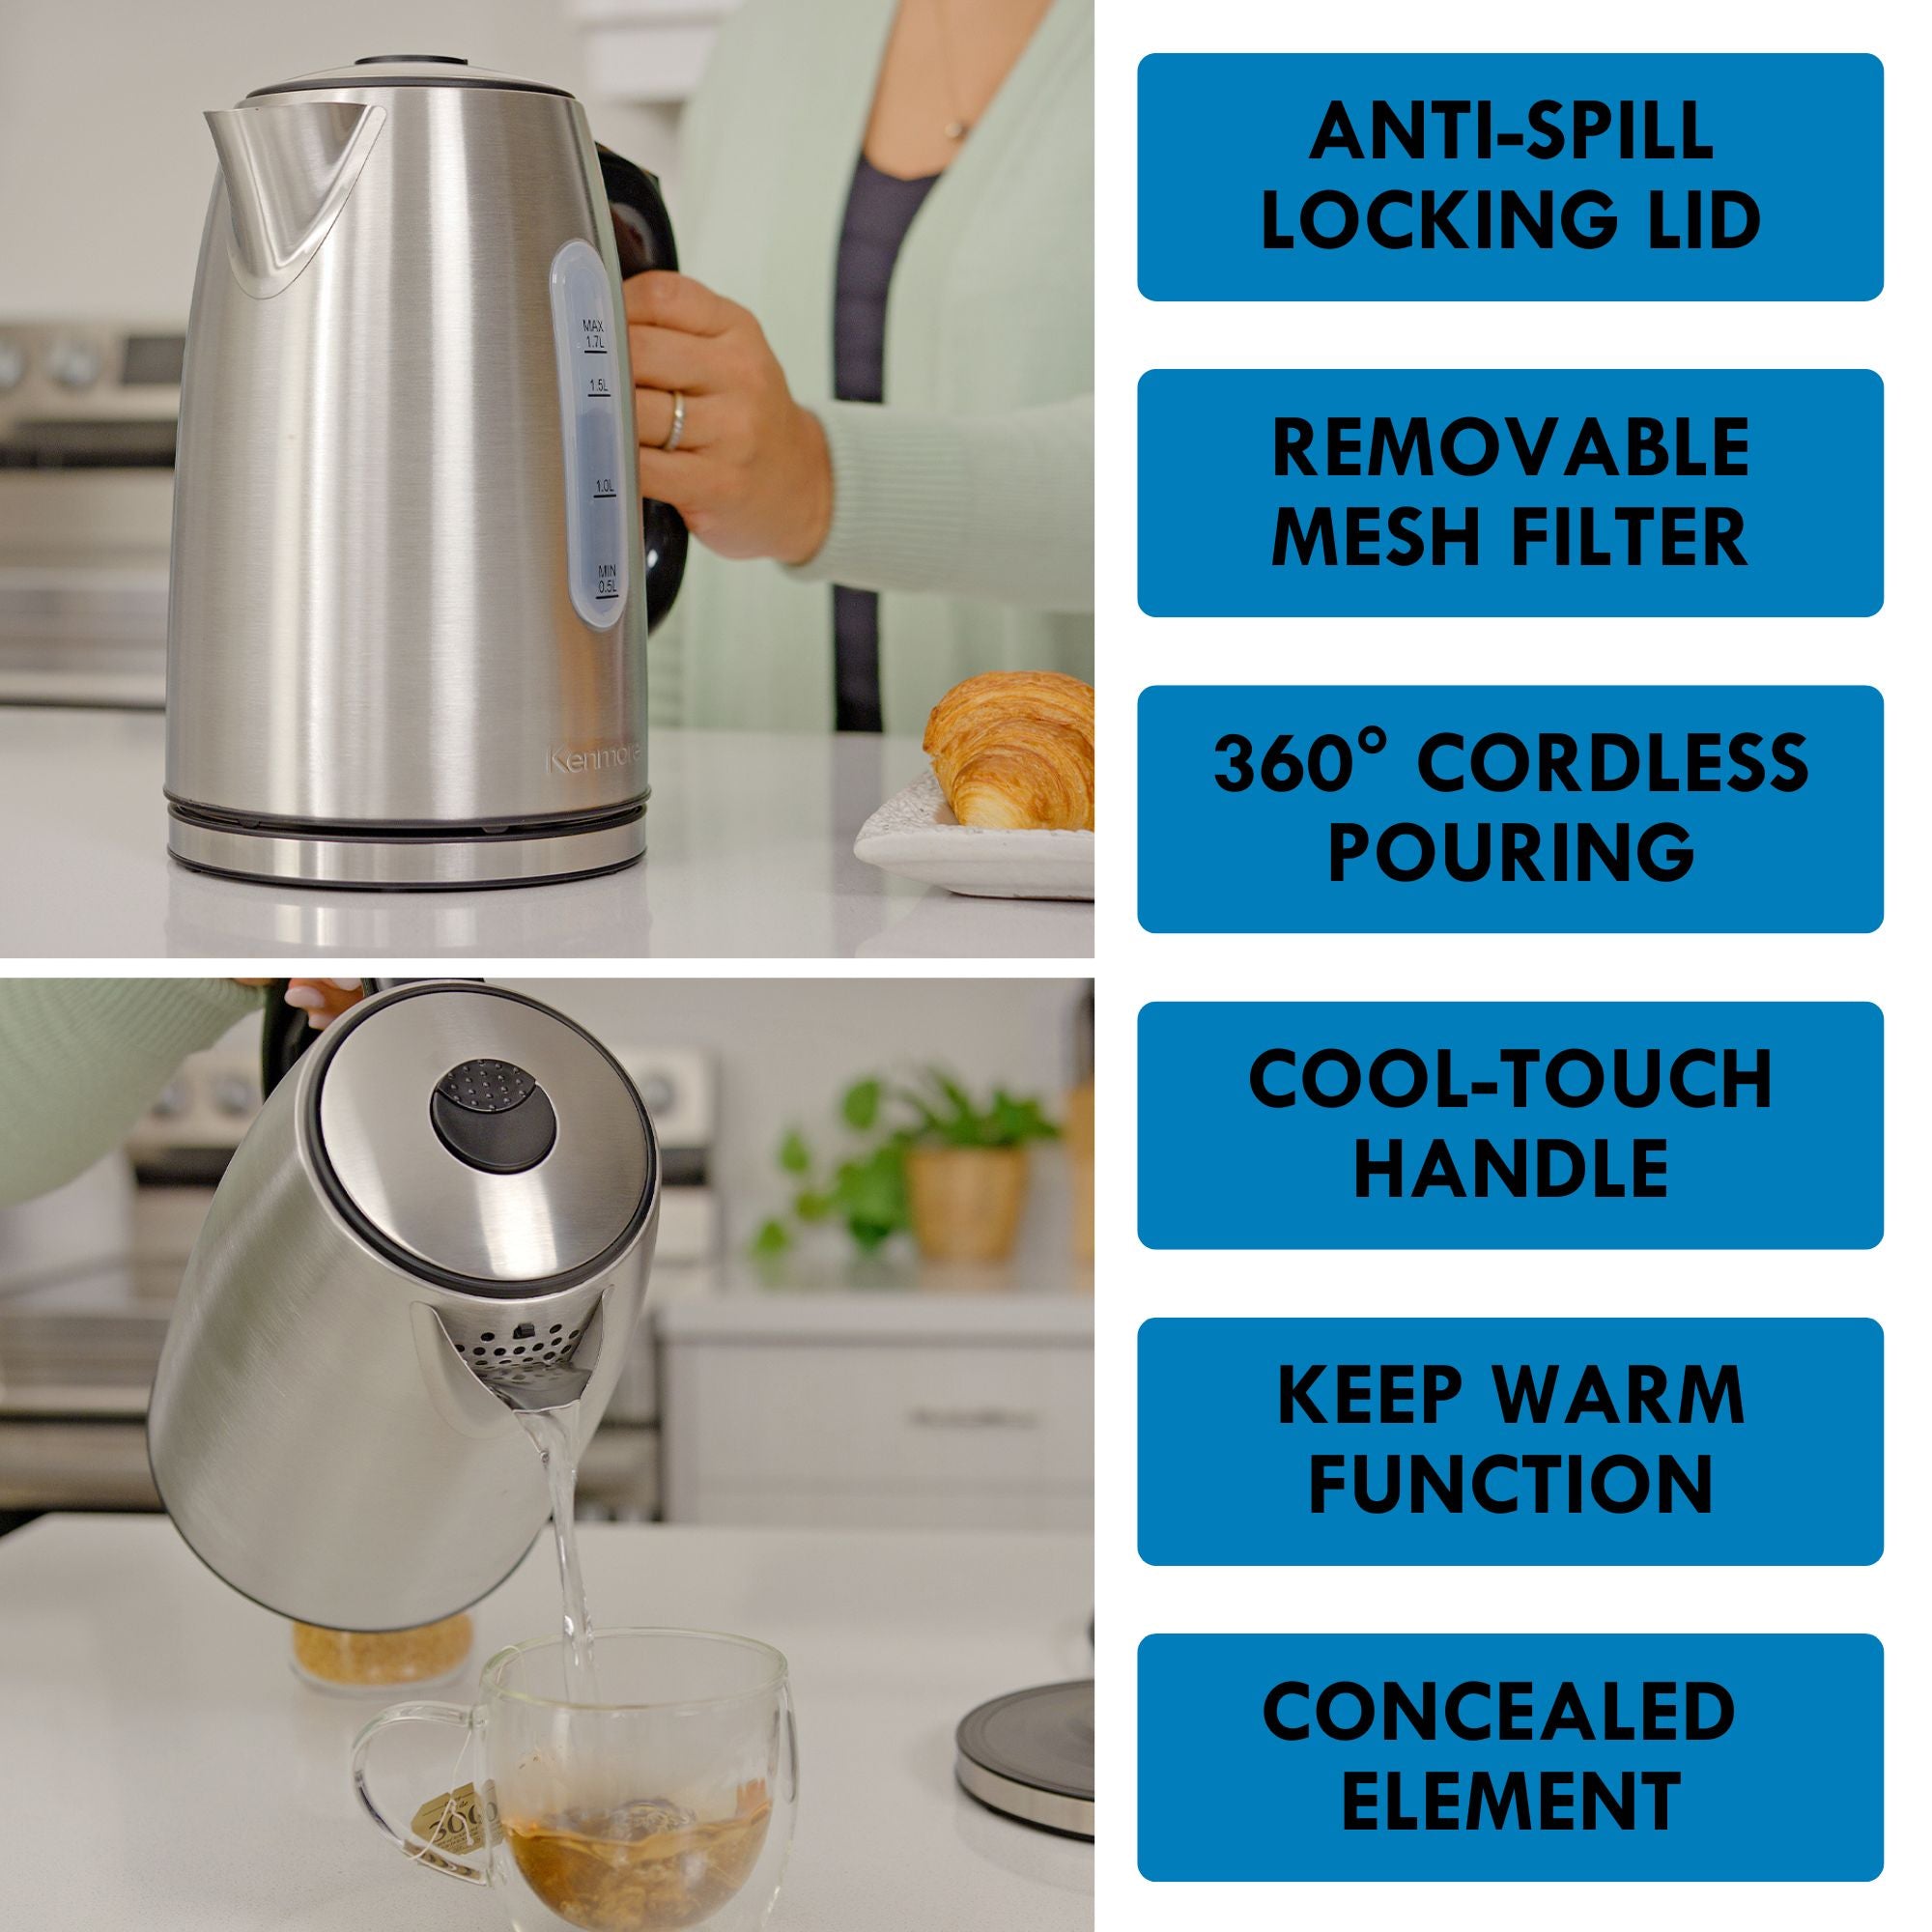 Kenmore digital cordless kettle on a white background on the left with a list of features to the right: Anti-spill locking lid; removable mesh filter; 360° cordless pouring; cool-touch handle; keep warm function; concealed element